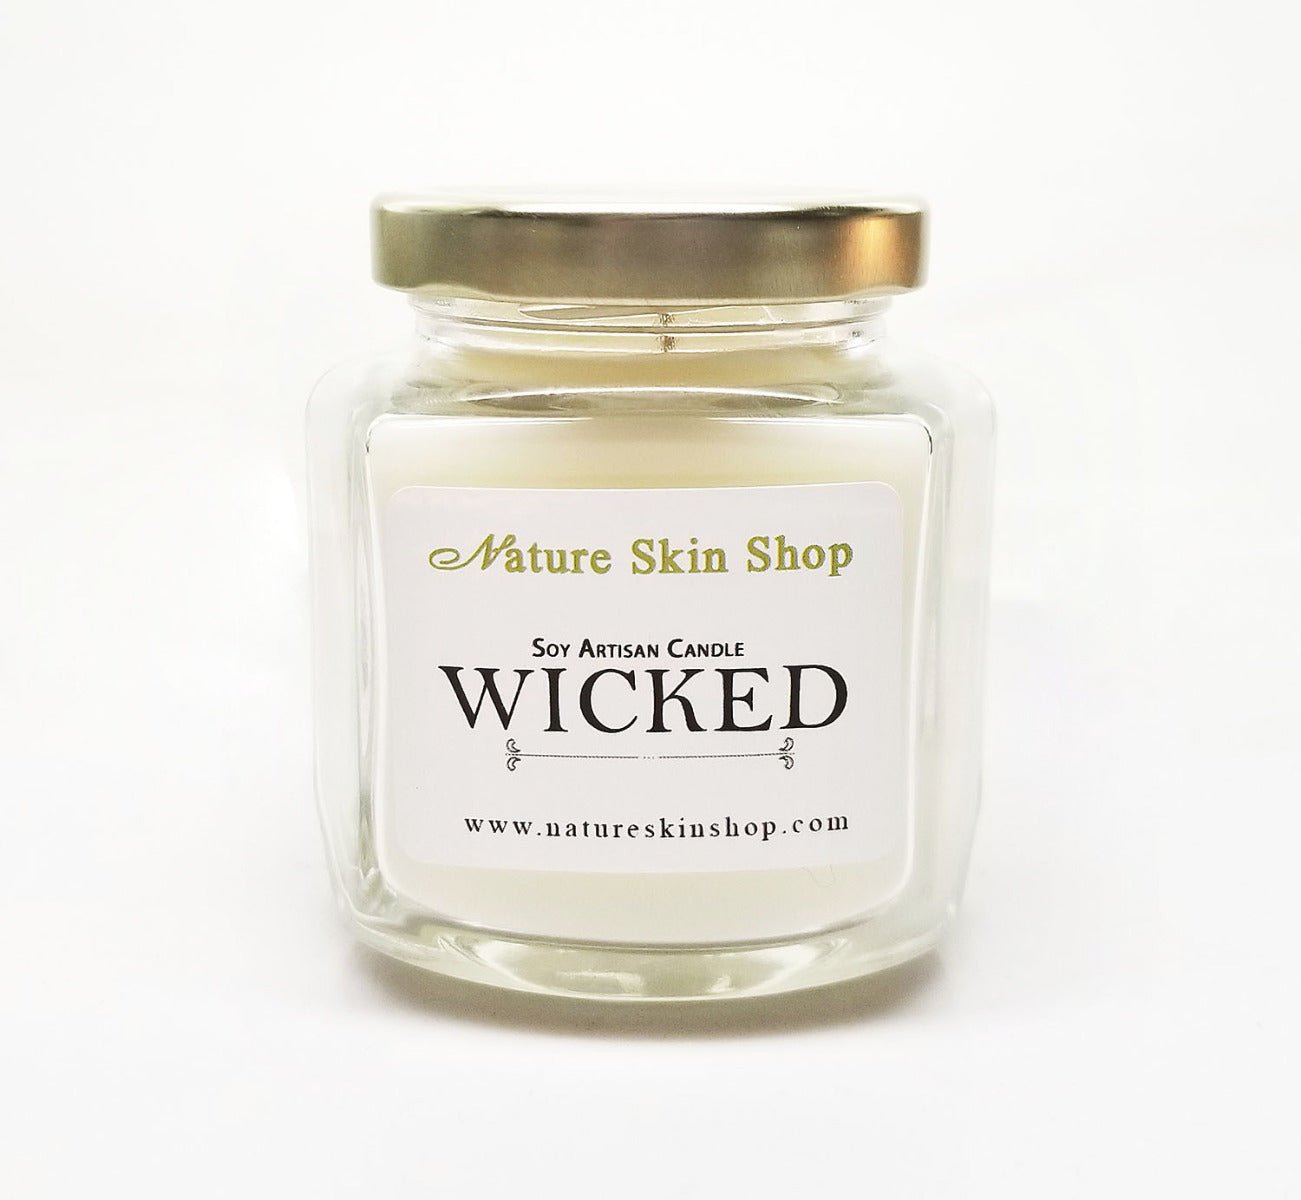 Wicked Artisan Soy candle - Nature Skin Shop